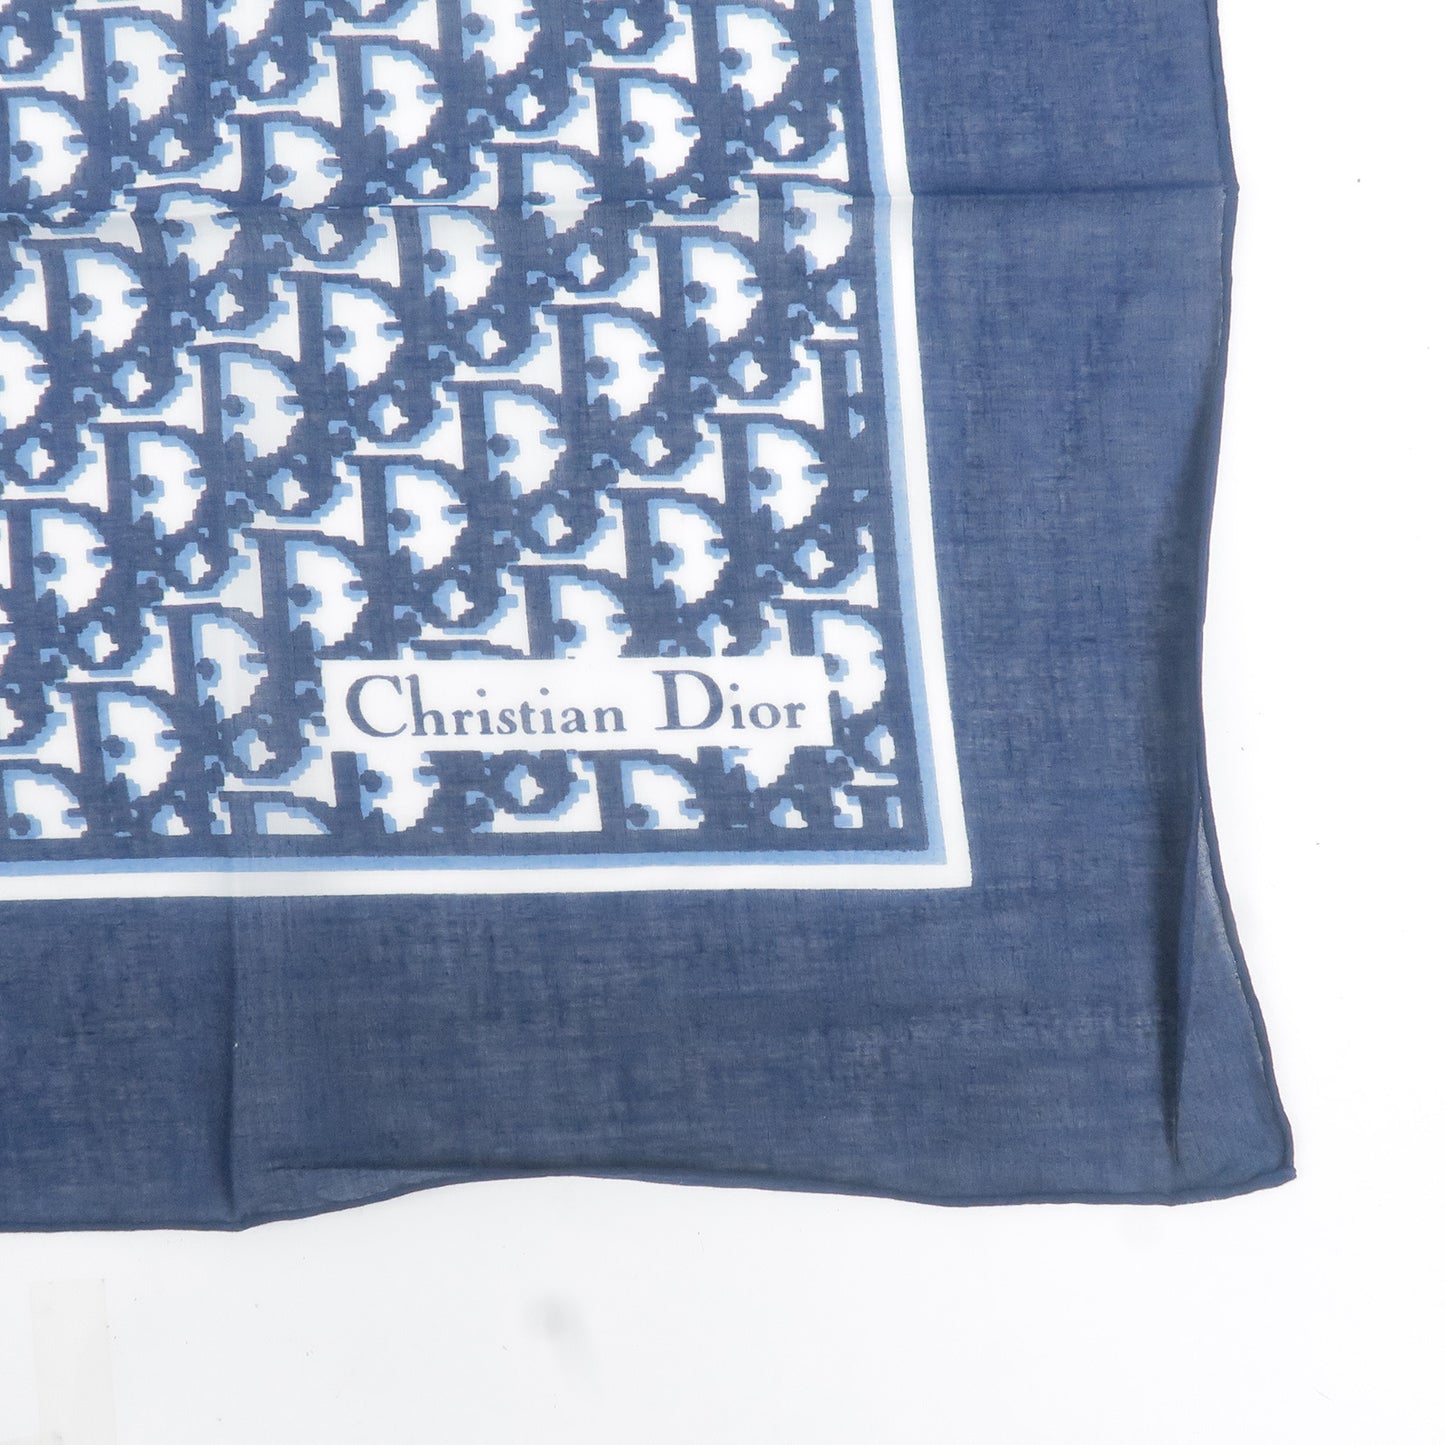 Christian Dior Trotter Print Cotton 100% Scarf Navy